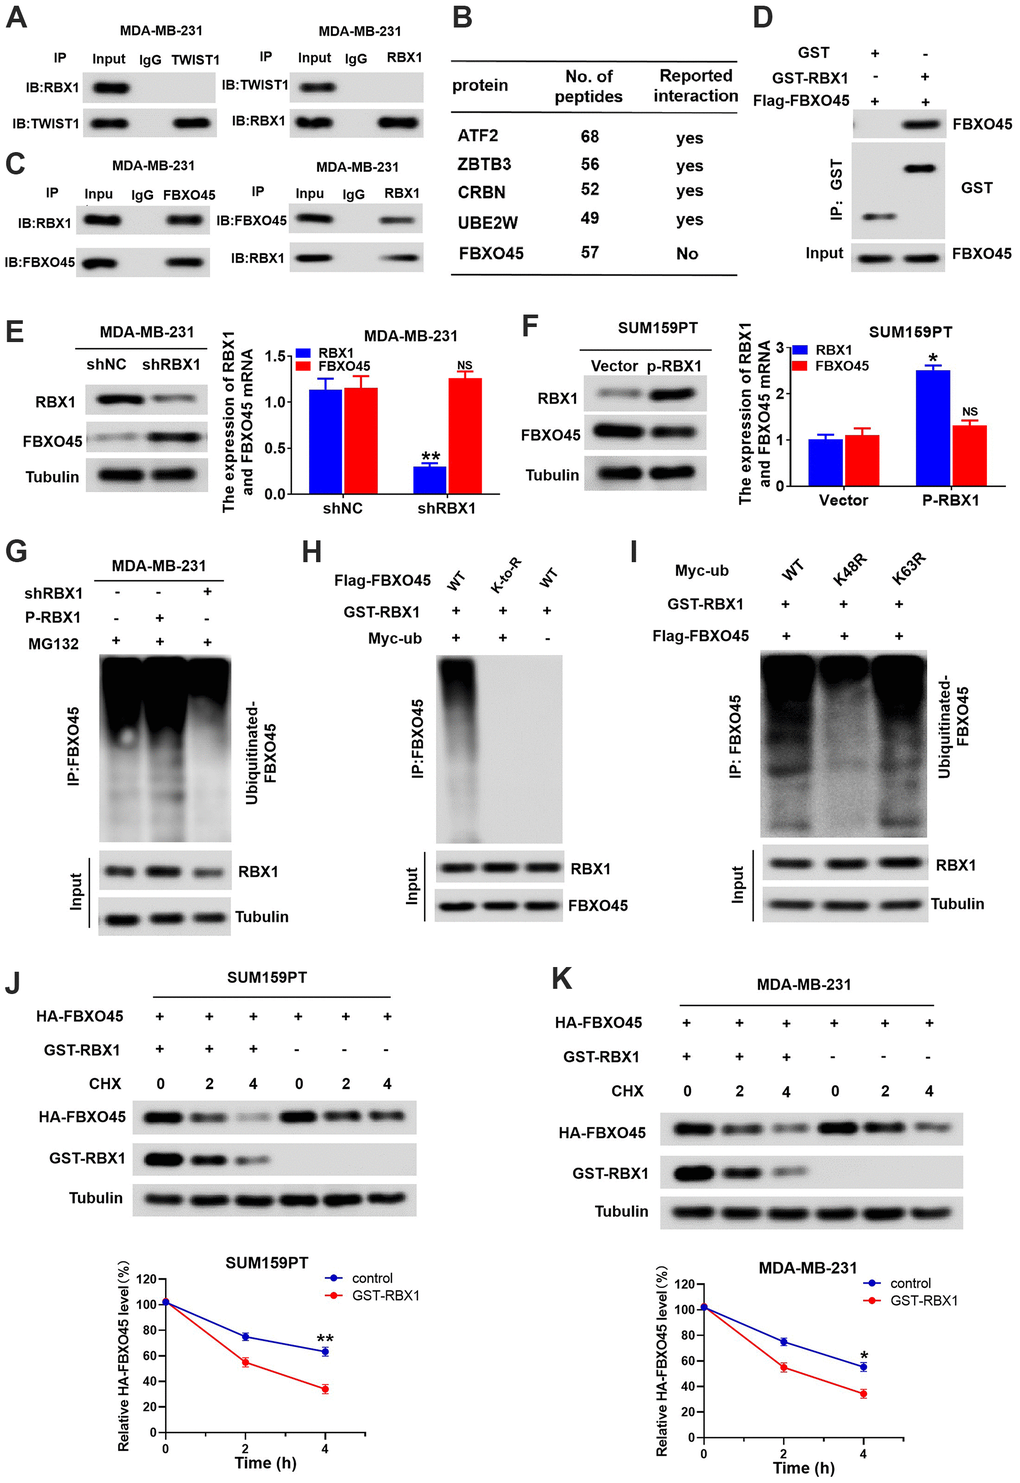 RBX1 promotes FBXO45 ubiquitination and degradation in TNBC cells. (A) Co-IP reveals no direct binding of endogenous TWIST1and RBX1. (B) Partial list of proteins related to RBX1, determined with immunoprecipitation-mass spectrometry. (C) Co-IP reflected direct binding of endogenous FBXO45 and RBX1 in the MDA-MB-231 cells. (D) GST pull-down analysis displaying direct binding of FBXO45 and RBX1. (E) qRT-PCR and western blotting exhibiting the FBXO45 and RBX1 expression levels in the RBX1-silencing MDA-MB-231 cells. **P F) The qRT-PCR and western blotting revealing the FBXO45 and RBX1 expression levels in SUM159PT cells stably transfected by plasmid with overexpression of RBX1. **P G) RBX1 exogenous expression or knockdown changed the FBXO45 ubiquitination. The proteasome suppressor MG132 was used to treat the cells from each group. Cell lysates were generated and next immunoprecipitated by an anti-FBXO45 antibody. Western blotting was applied for measuring the levels of ubiquitin-linked FBBXO45 utilizing anti-UB antibody. (H) Ubiquitination of wild-type FBBXO45 or K-to-R mutants (mutations in all Lys position of the FBBXO45 gene). (I) FBXO45 ubiquitination in the HEK293 cells was detected. (J, K) TNBC cells were transfected by plasmids encoding HA-FBXO45, without or with p-RBX1 plasmid. Cells were next exposed to 20μmol/L of cyclohexanone (CHX) at the given times, and the anti-HA antibody was utilized to determine FBXO45 degradation. *P P 